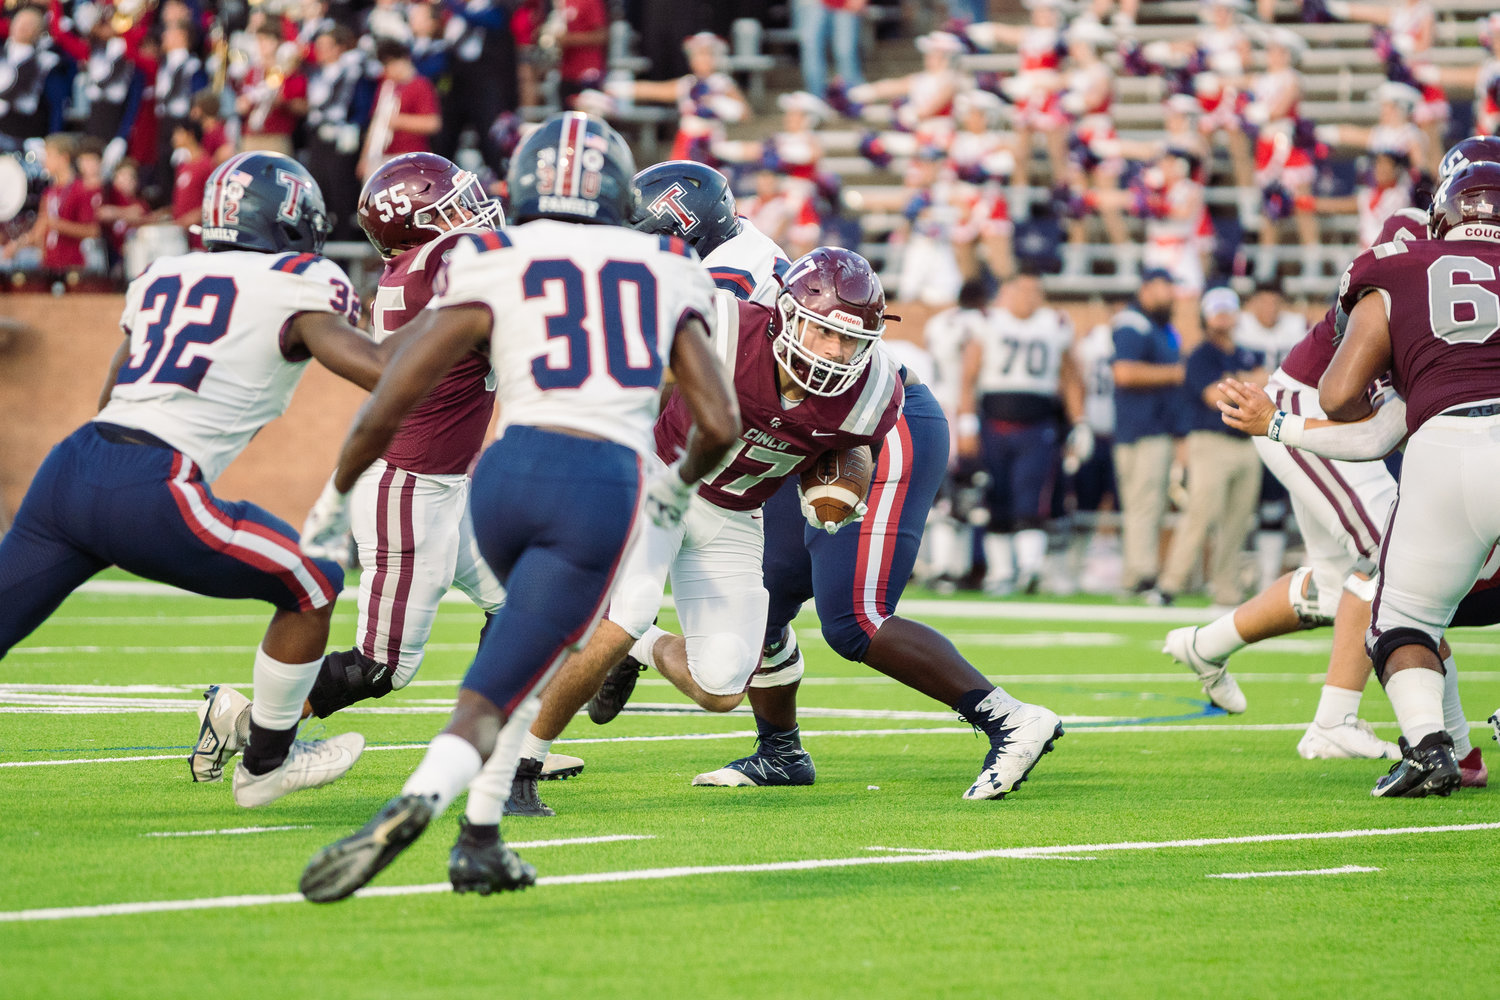 Cinco Ranch’s Eric Eckstrom runs the ball during Friday’s game between Cinco Ranch and Tompkins at Rhodes Stadium.